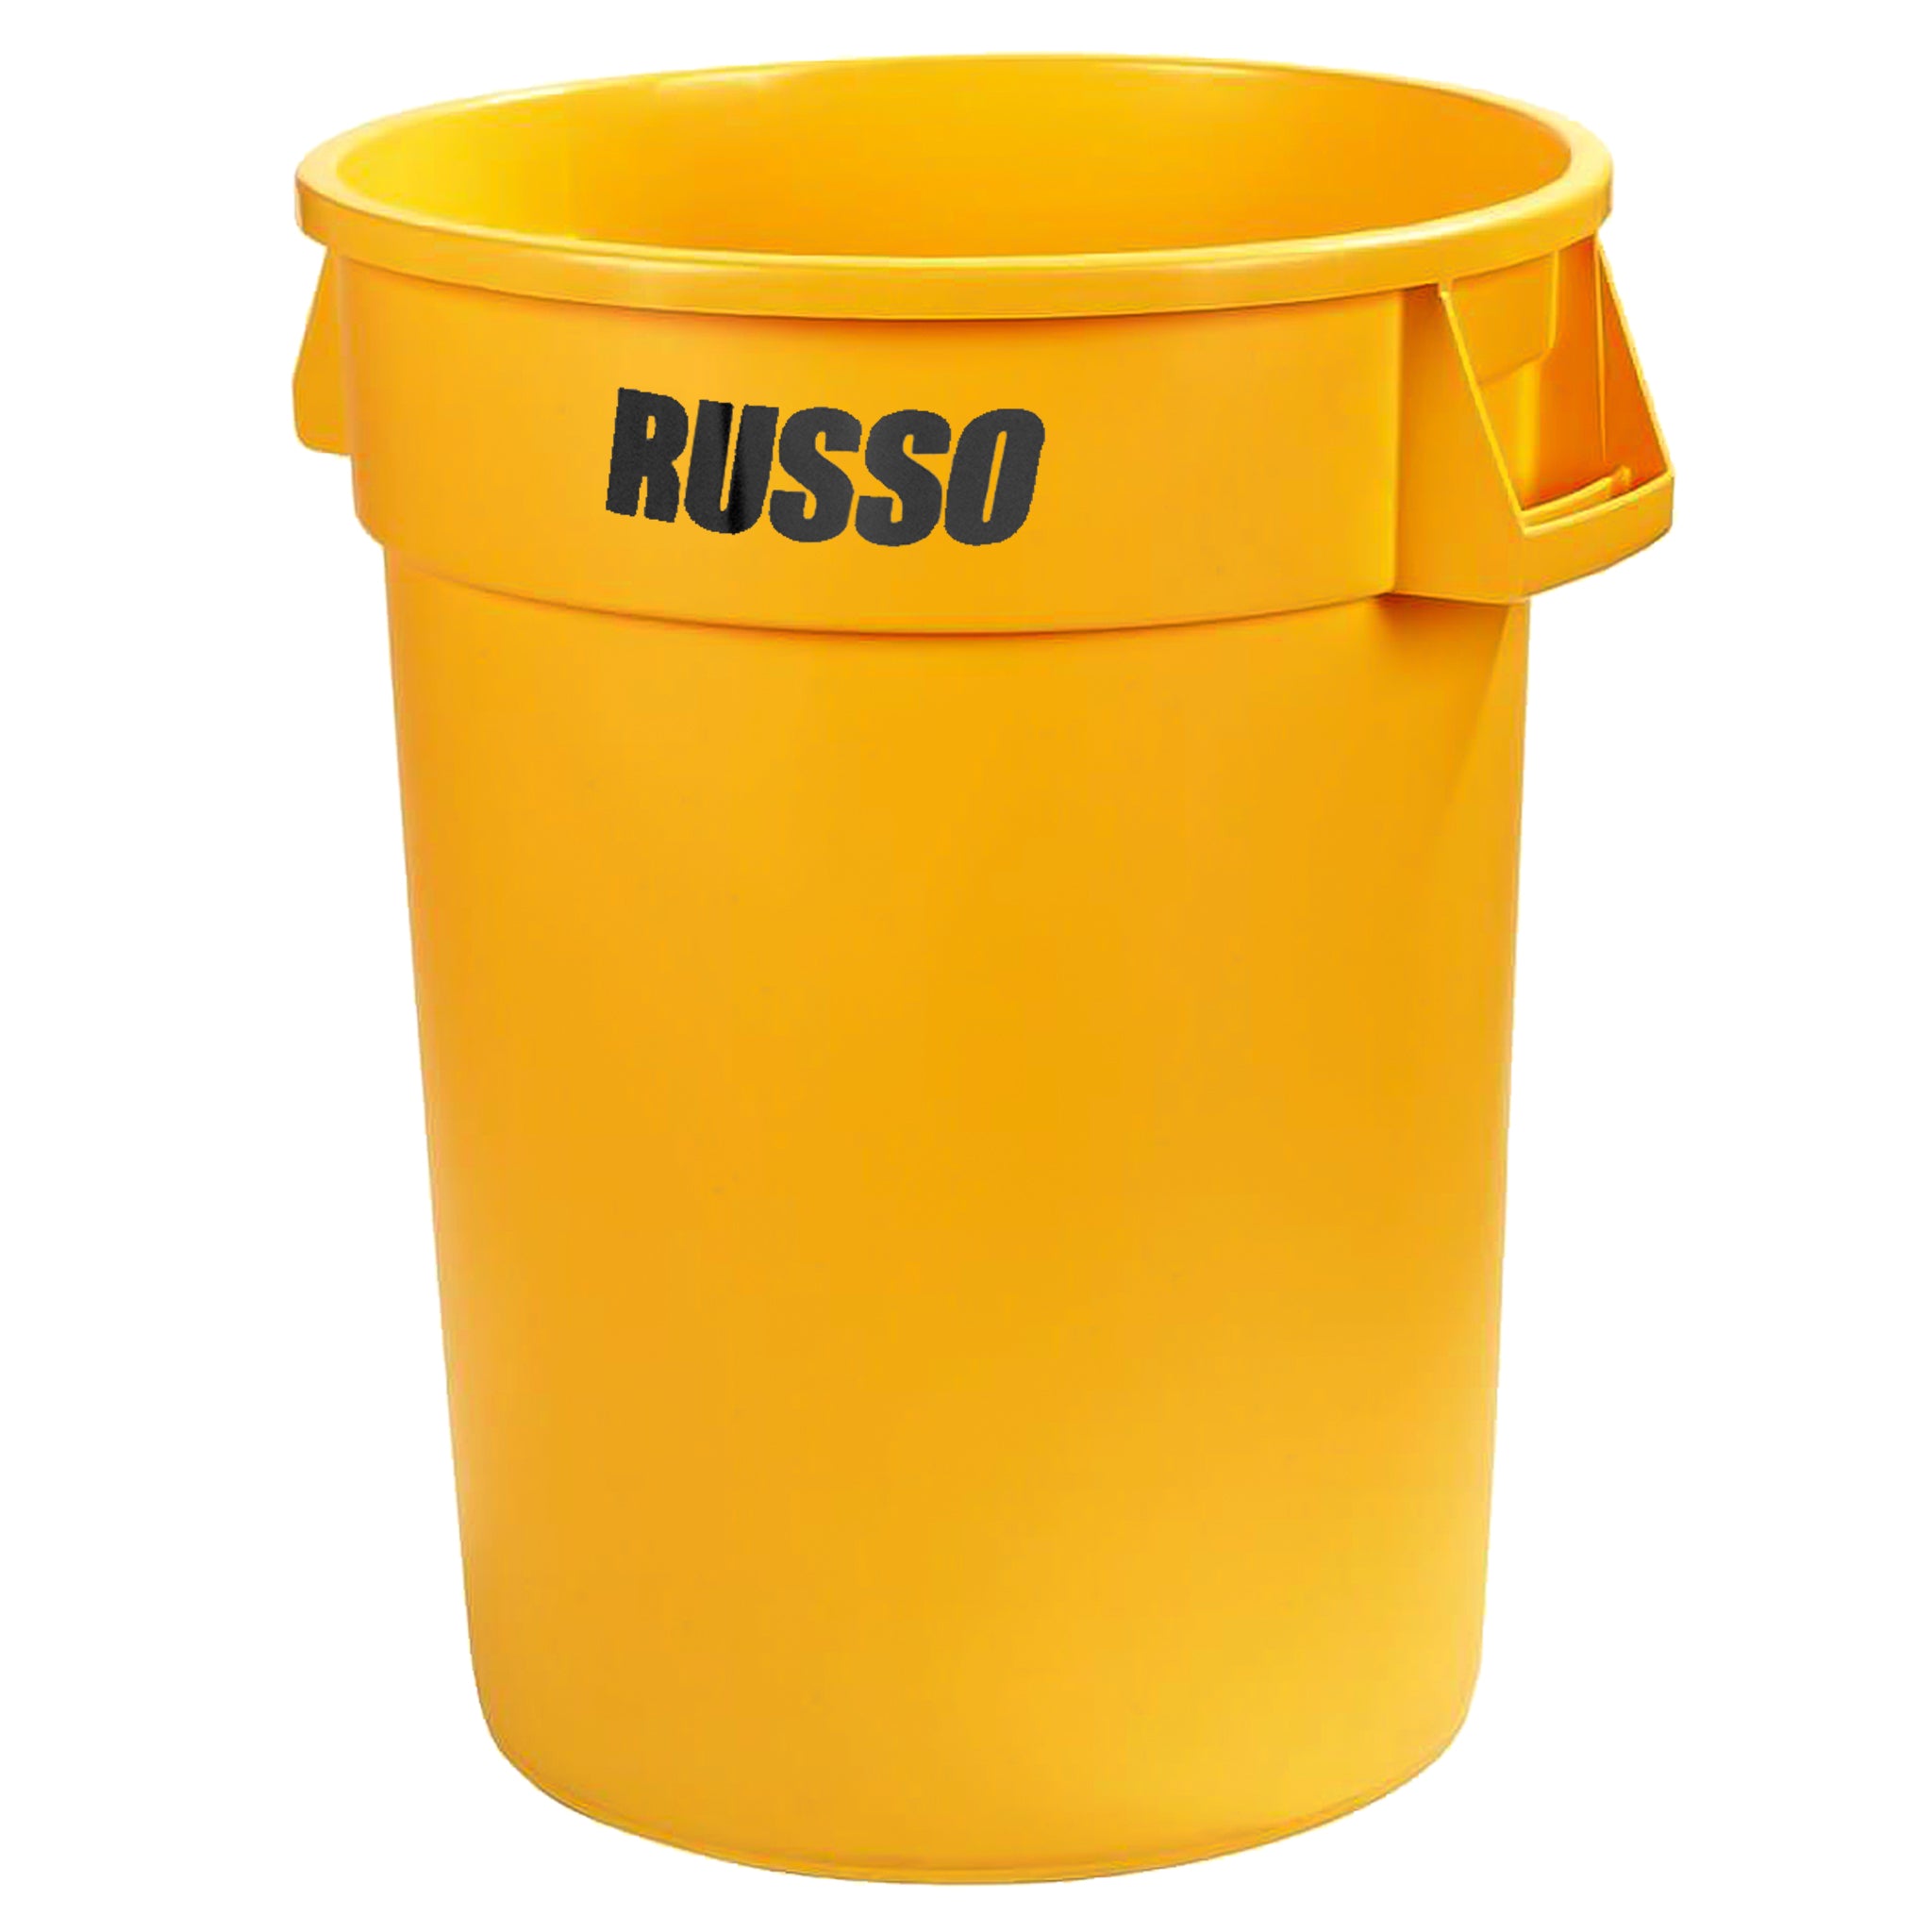 RUSSO Glow Garbage Can 32 Gallon – Yellow